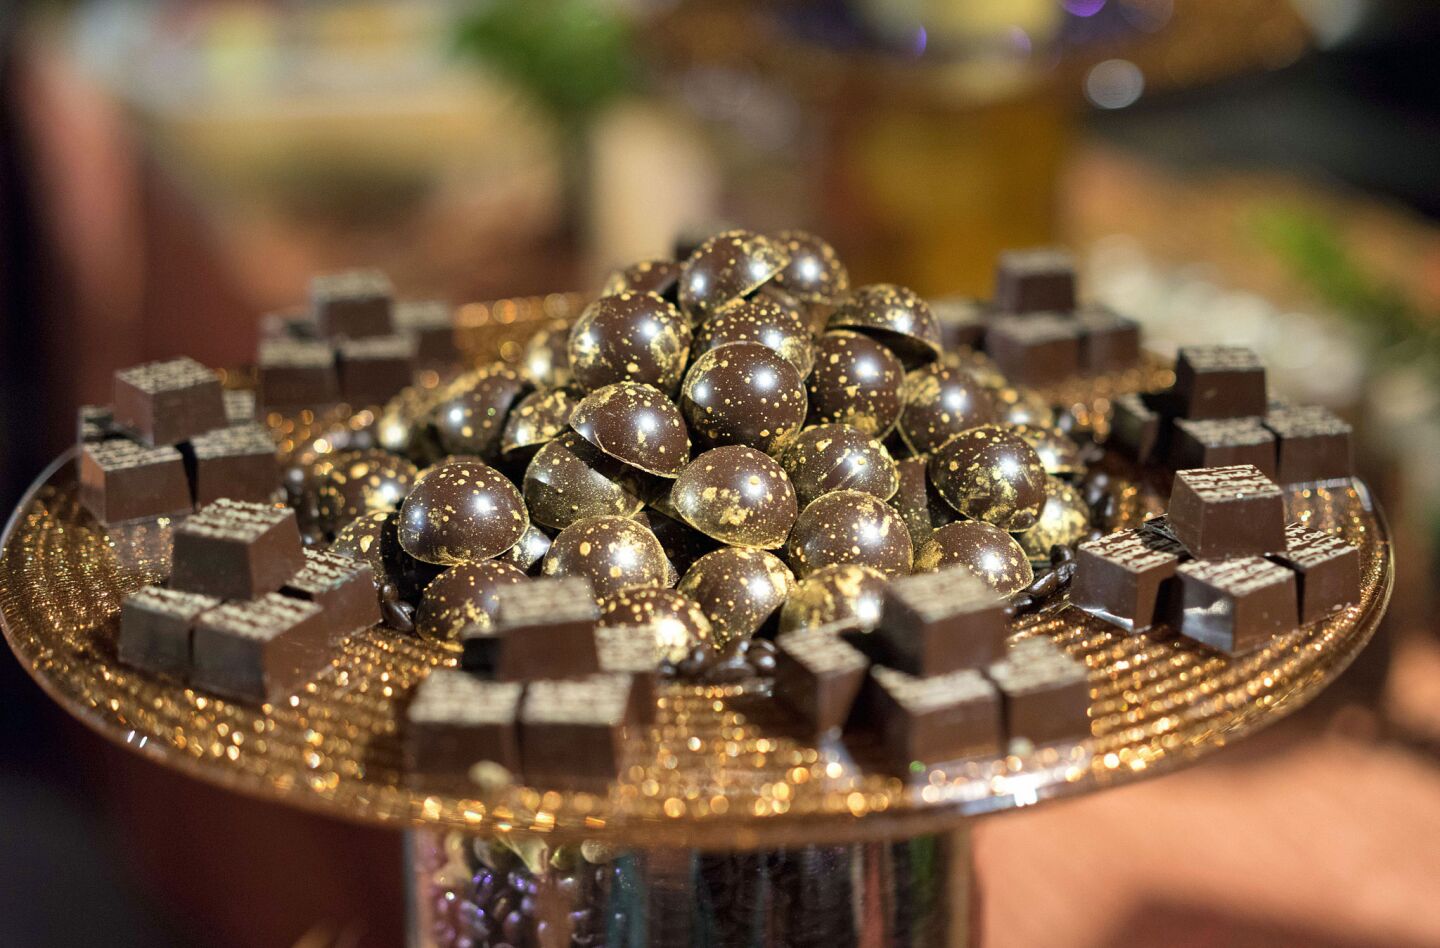 Gold-dusted hand-made chocolates at the Governors Ball.